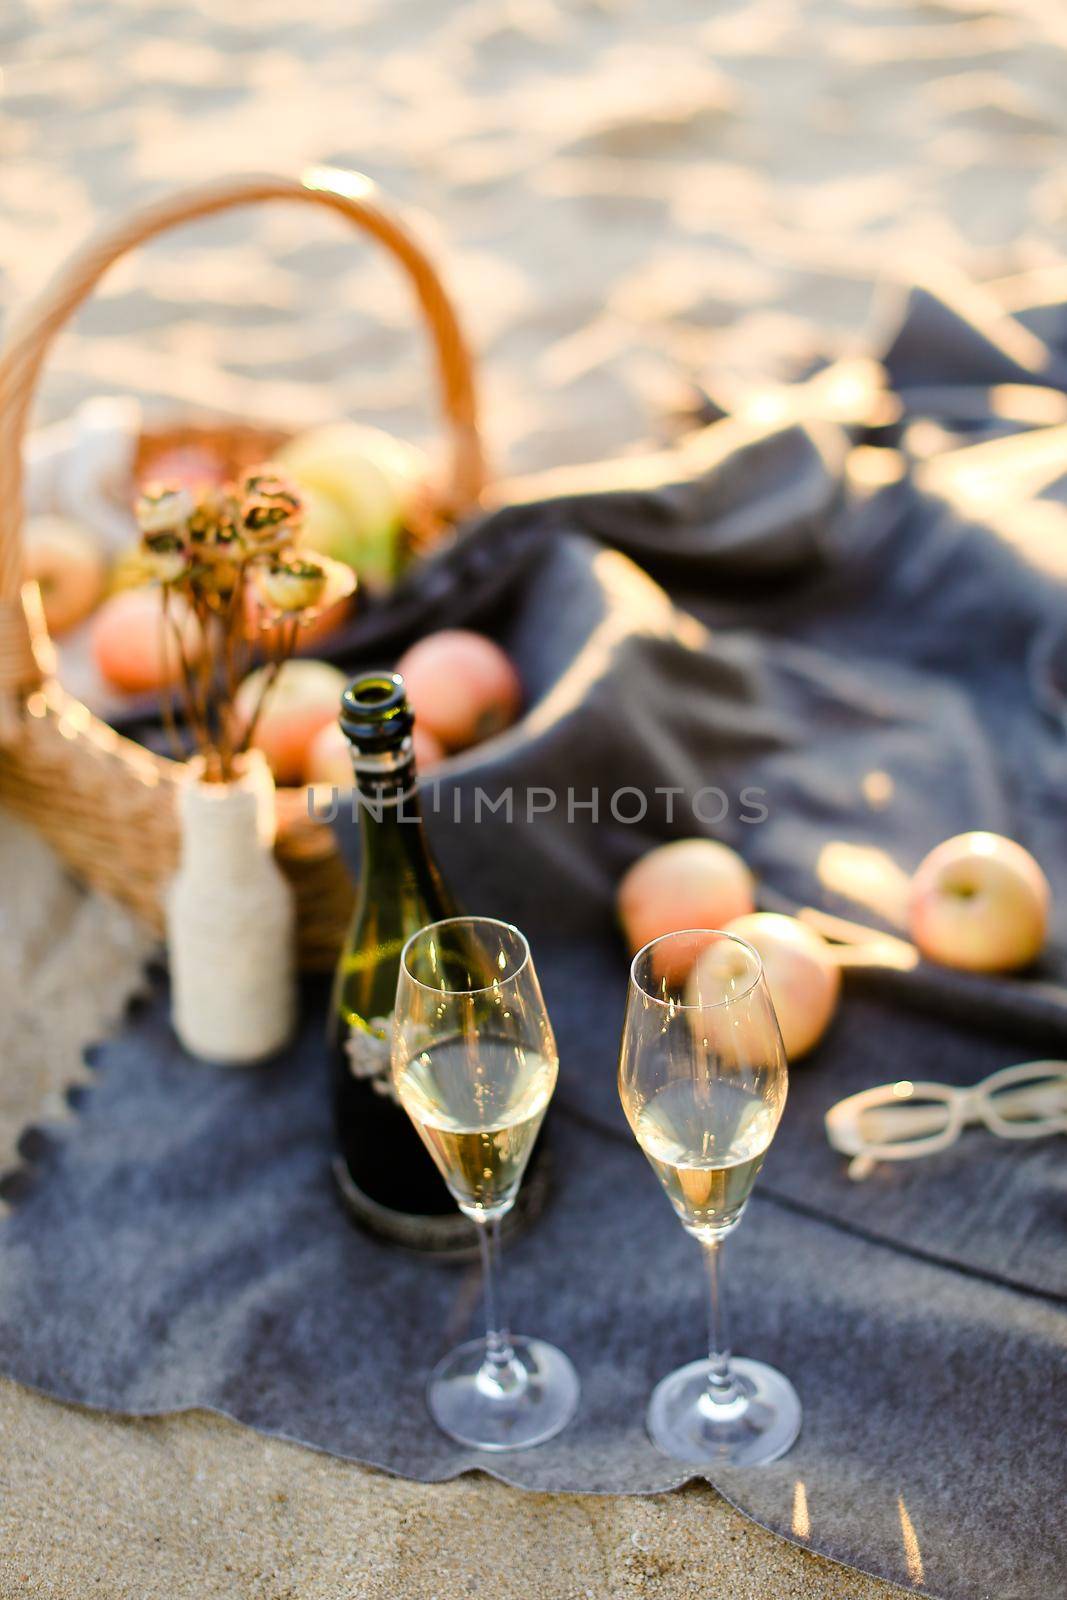 Focus on bottle of champagne and glasses, basket with fruits on plaid and beach in blurry background. by sisterspro